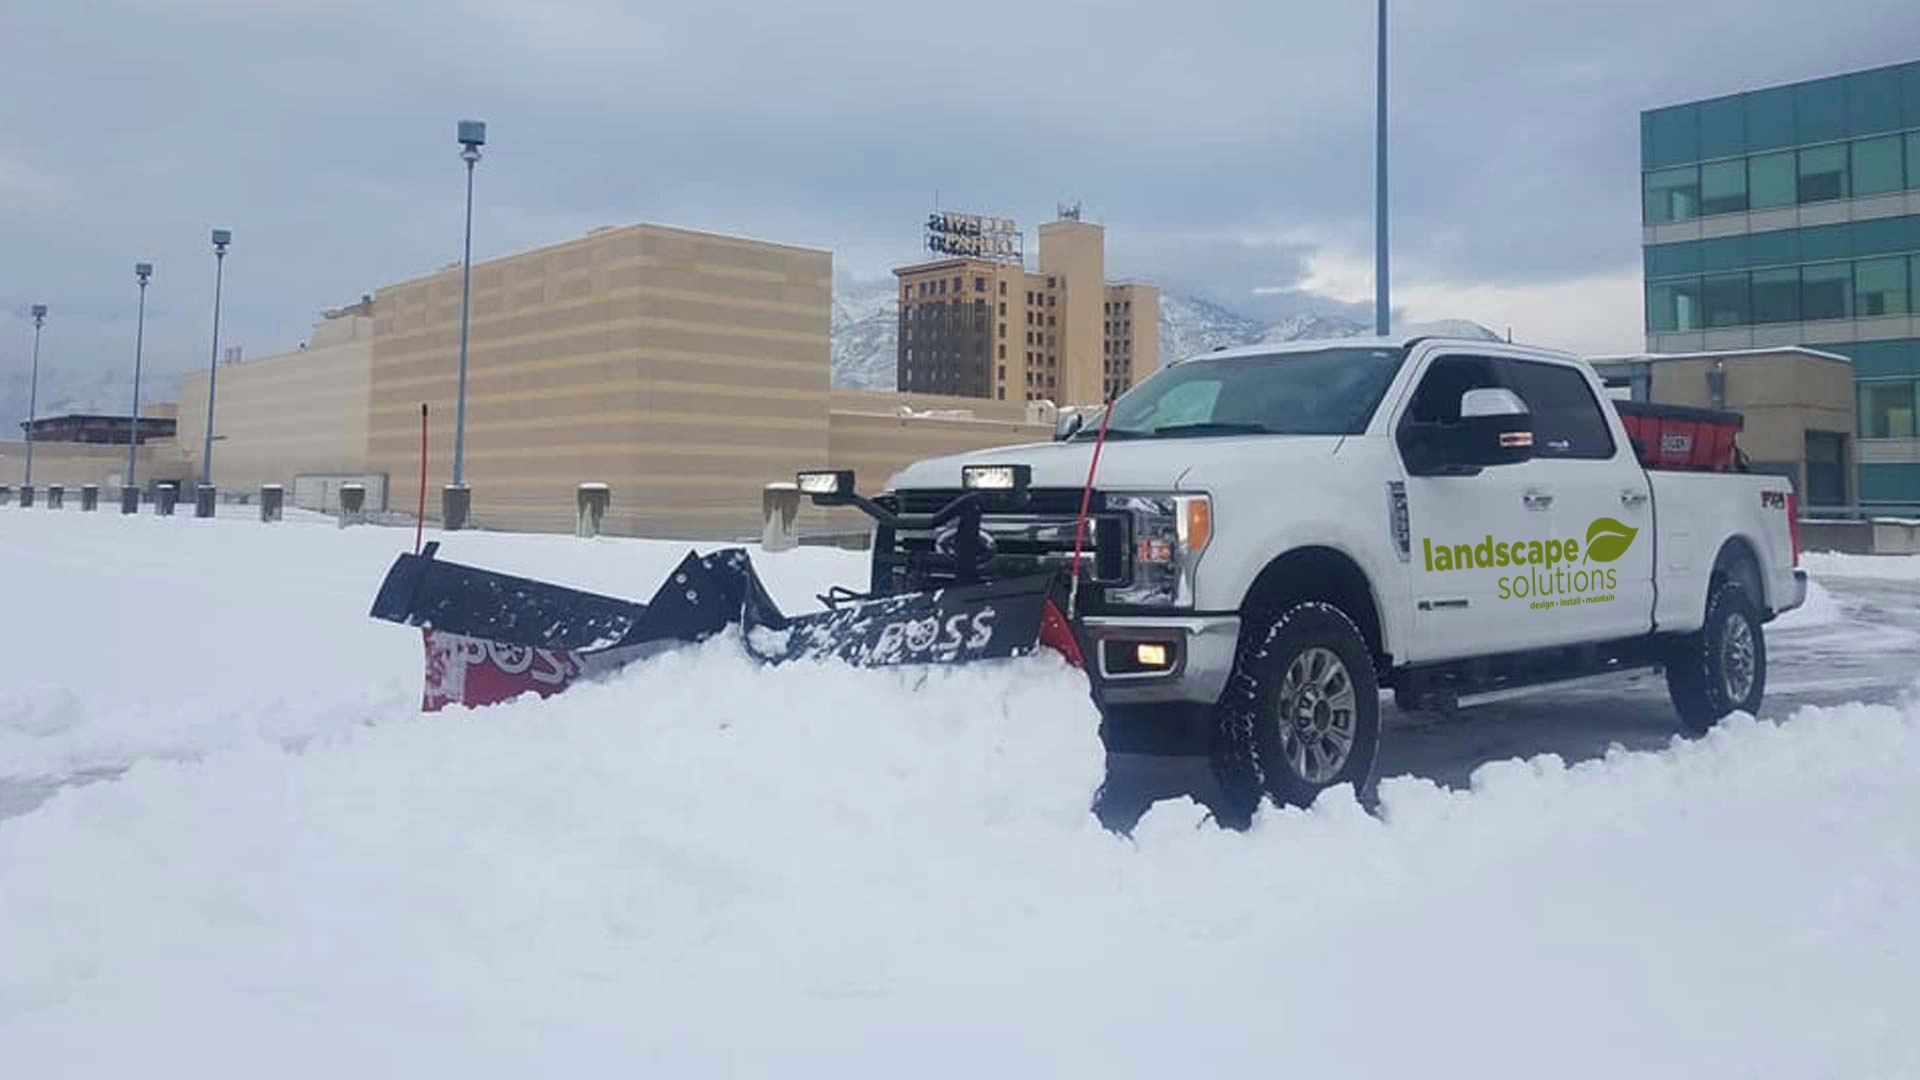 Our truck and plow removing snow from a large commercial parking lot located in Ogden, UT.